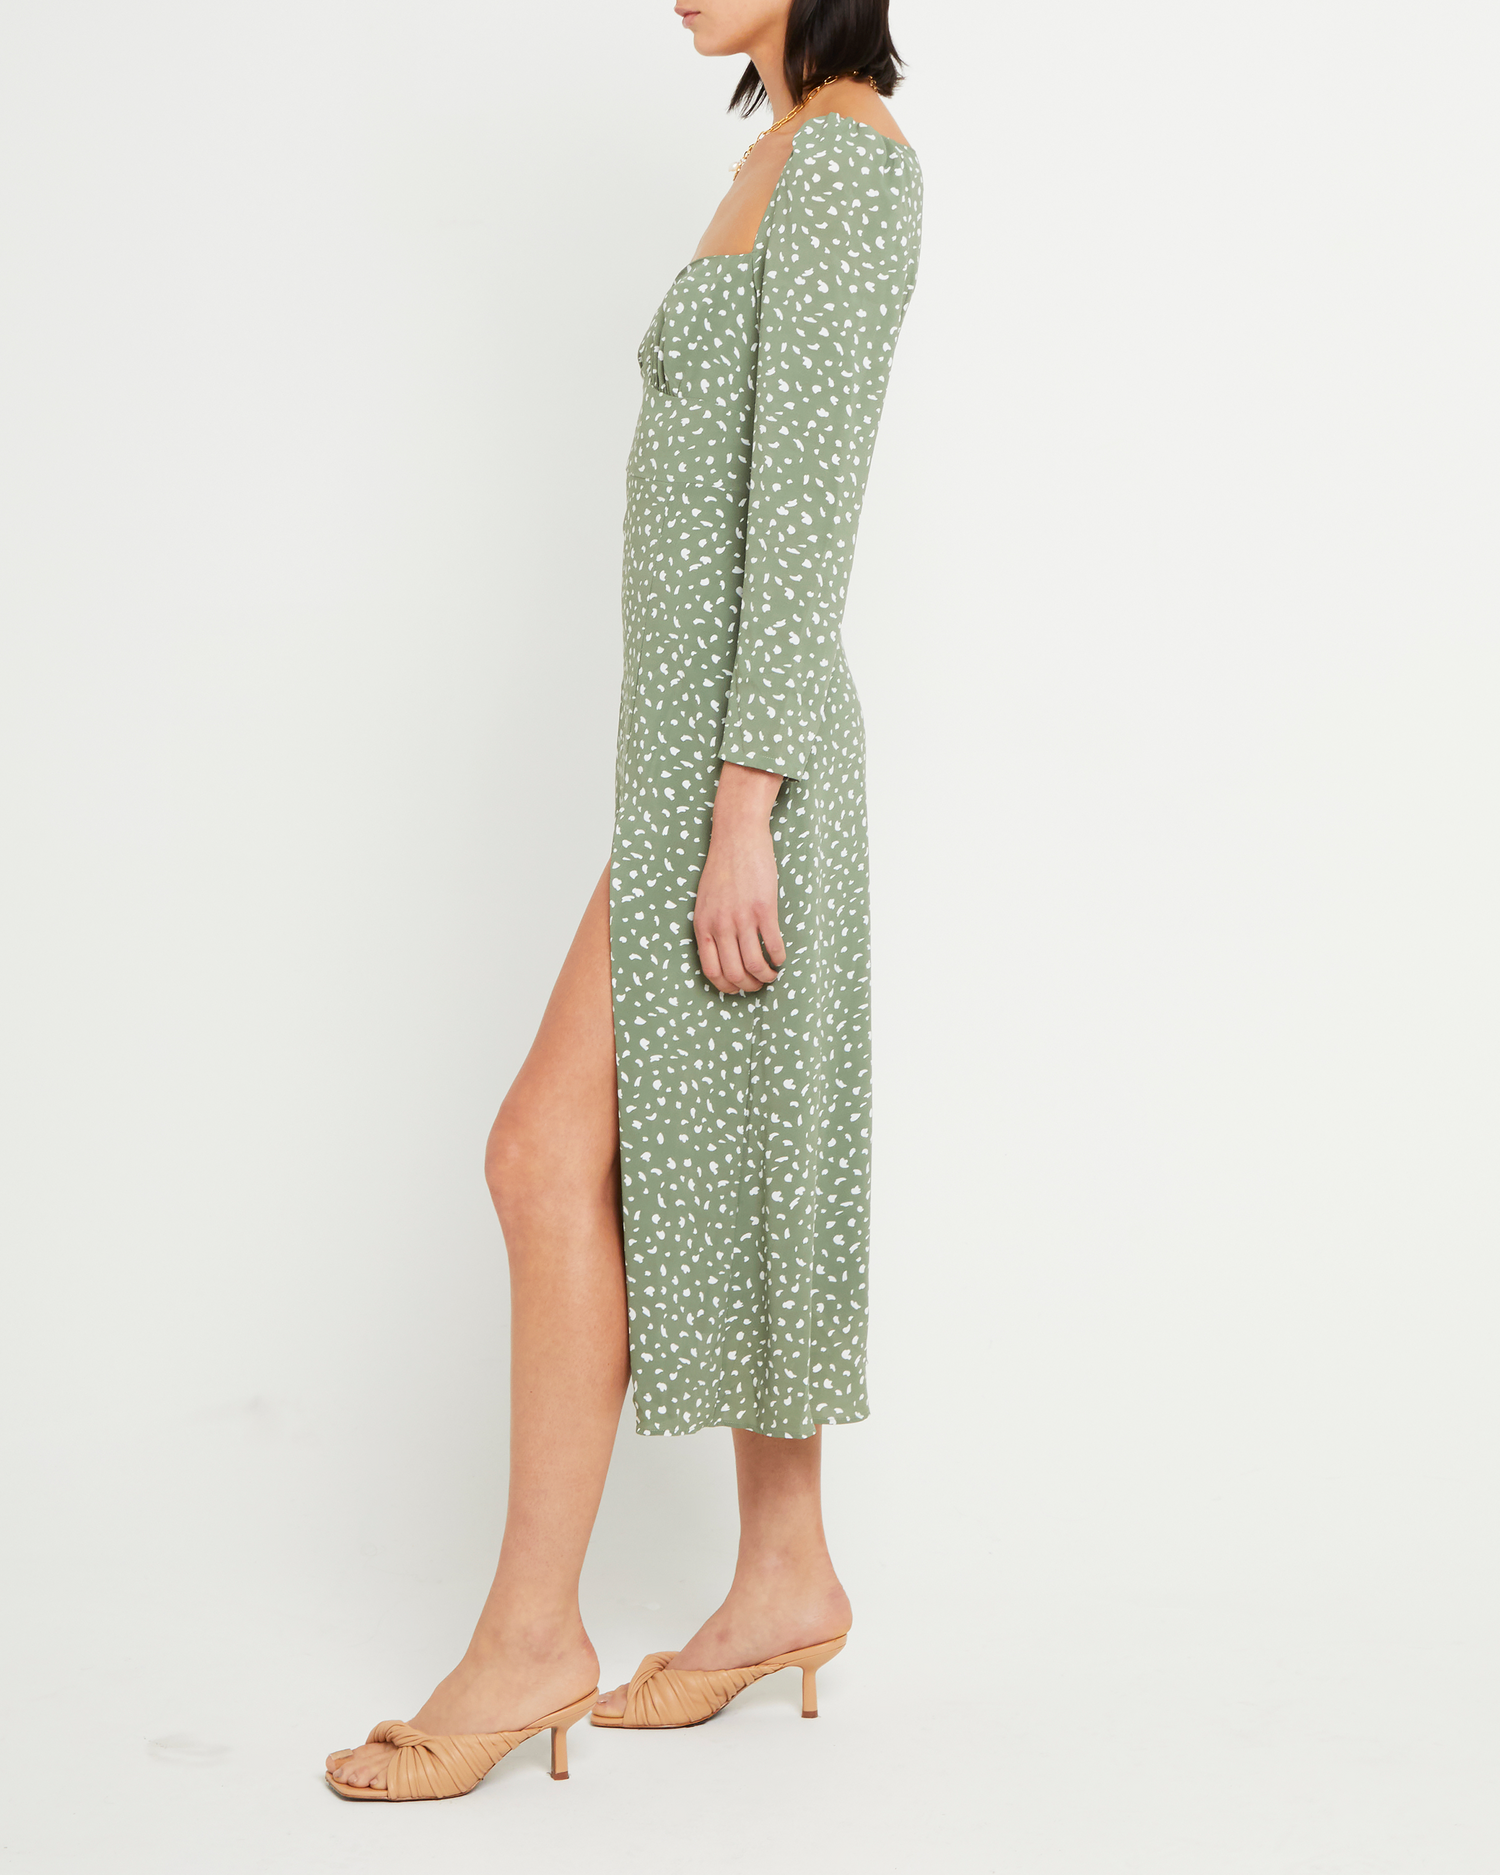 Third image of Crimini Dress, a green midi dress, sweetheart neckline, floral, long sleeves, fitted